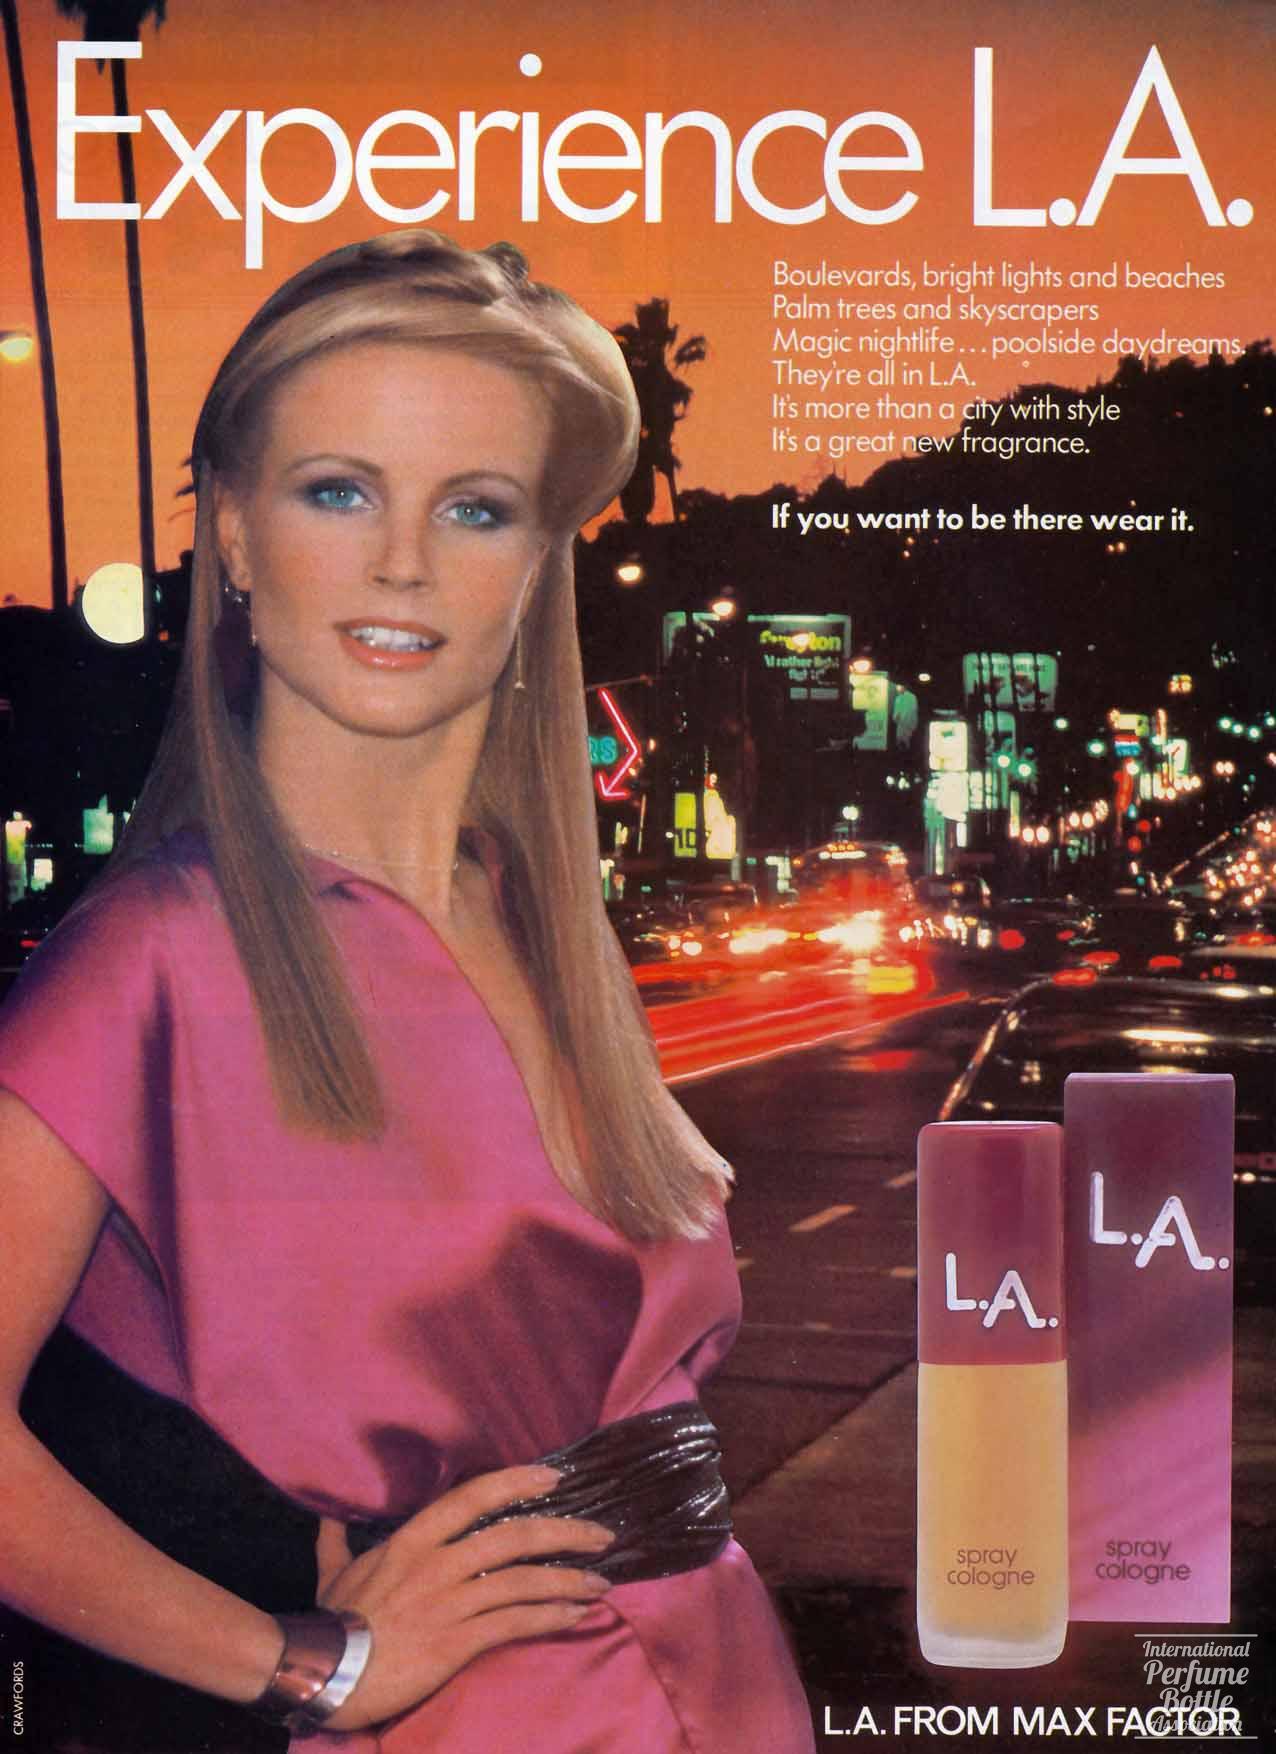 "L. A." by Max Factor Advertisement - 1980